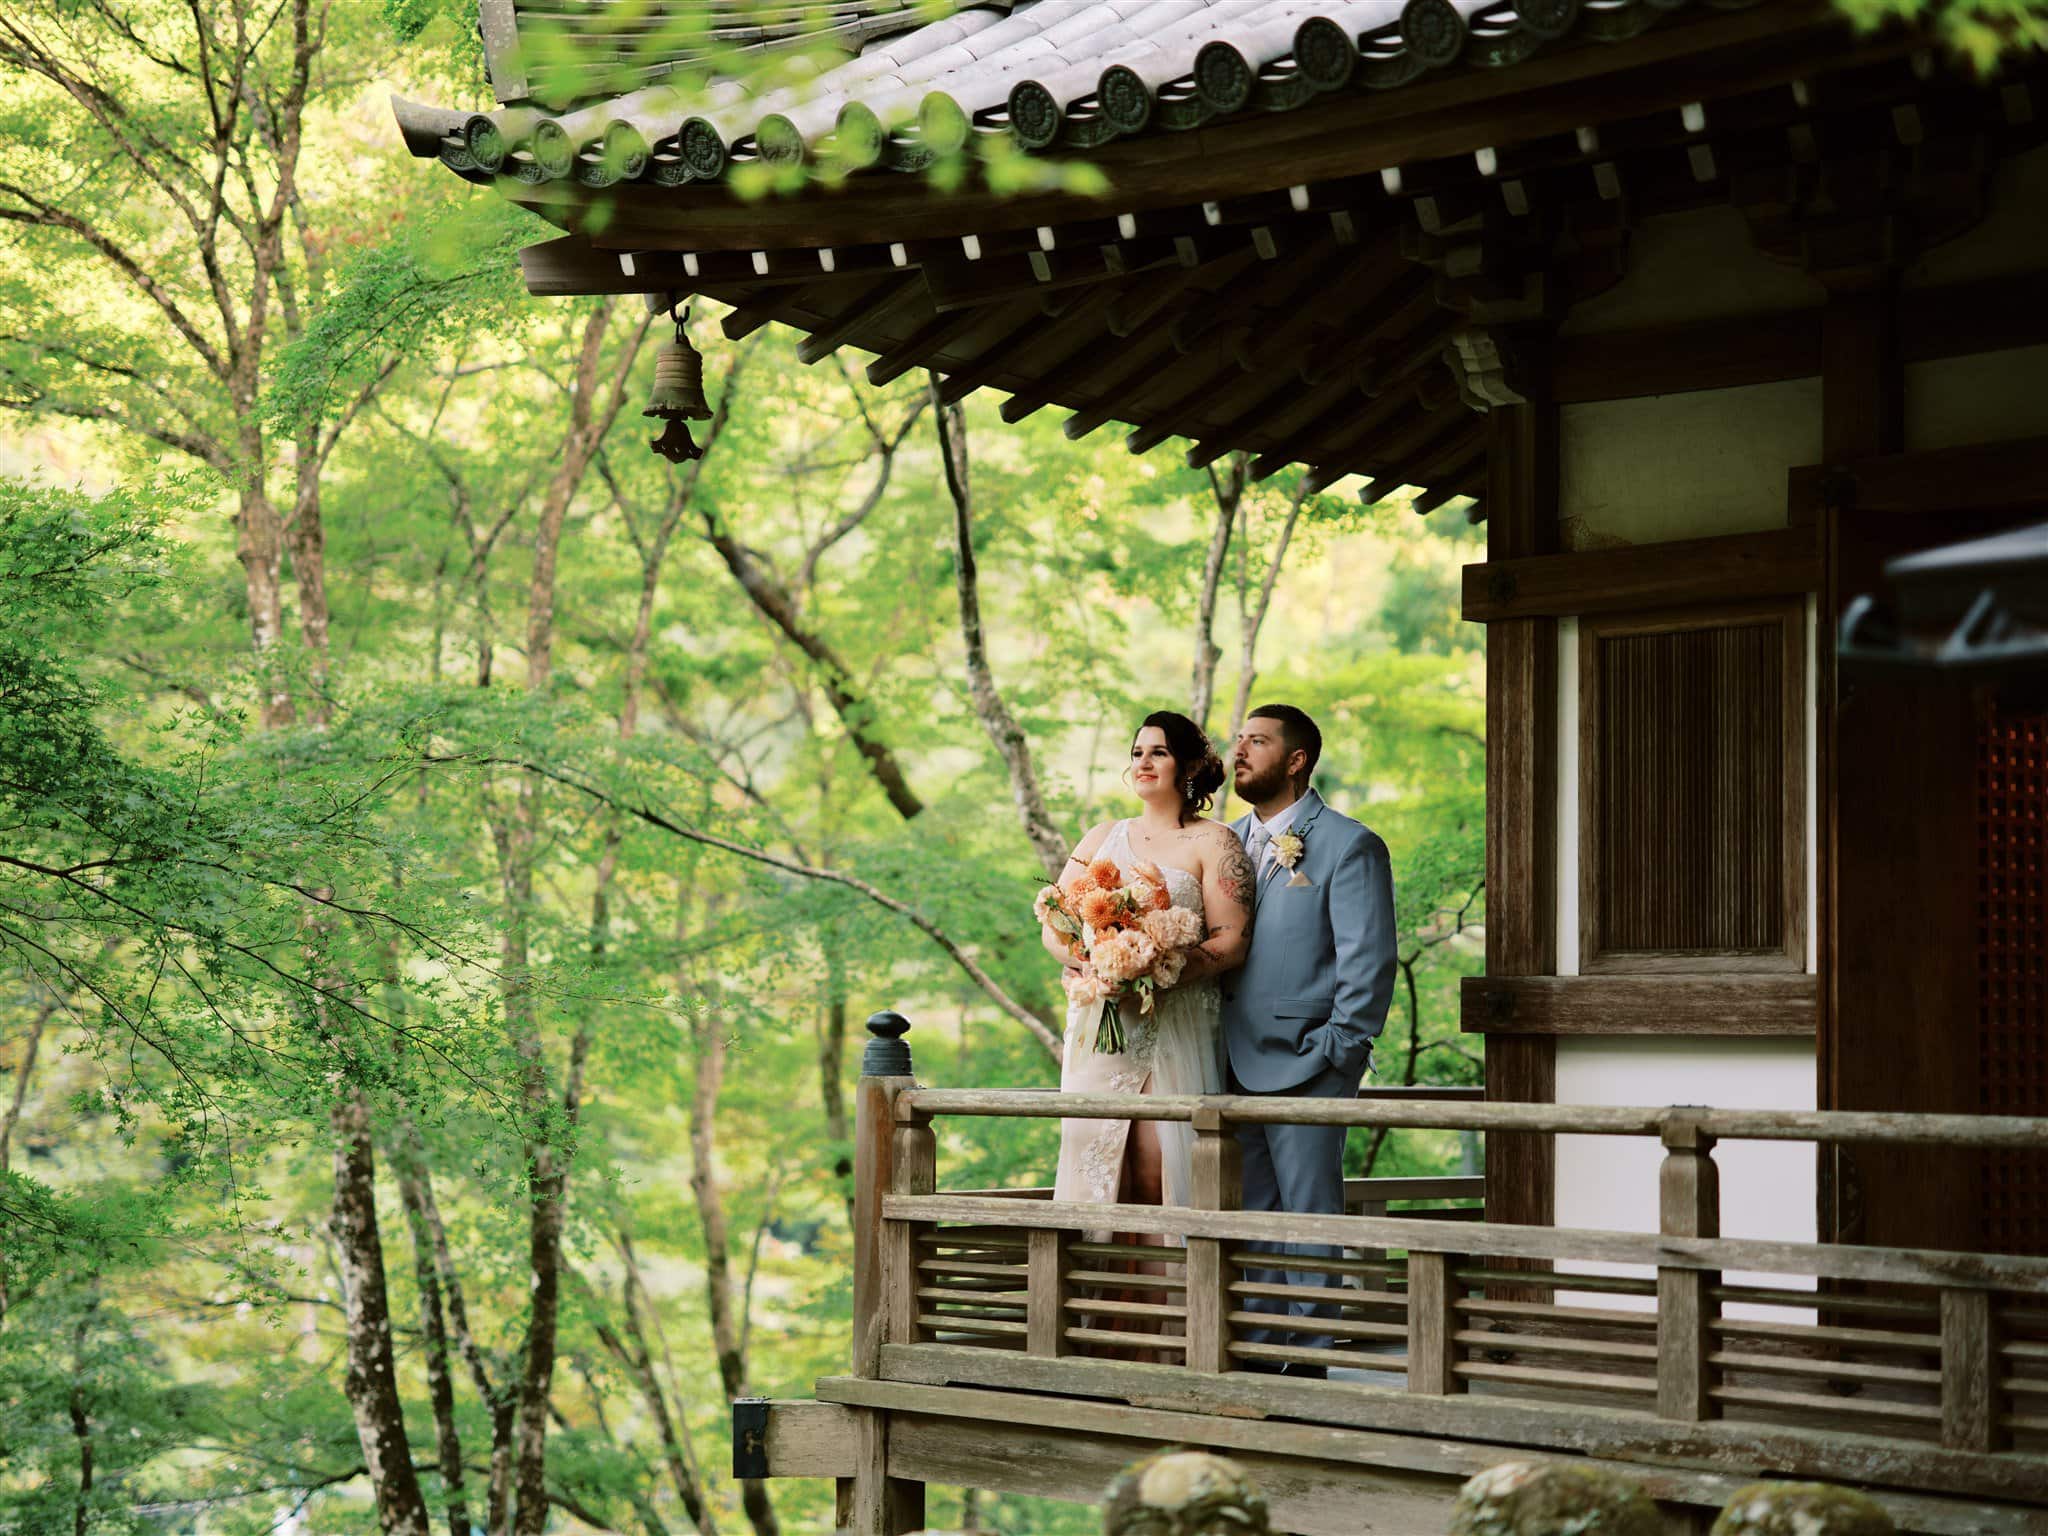 Kyoto Tokyo Japan Elopement Wedding Photographer, Planner & Videographer | A couple in wedding attire, embracing each other on the balcony of a beautiful Japanese house. The scene captures the essence of a romantic Japan elopement, beautifully documented by a talented photographer.